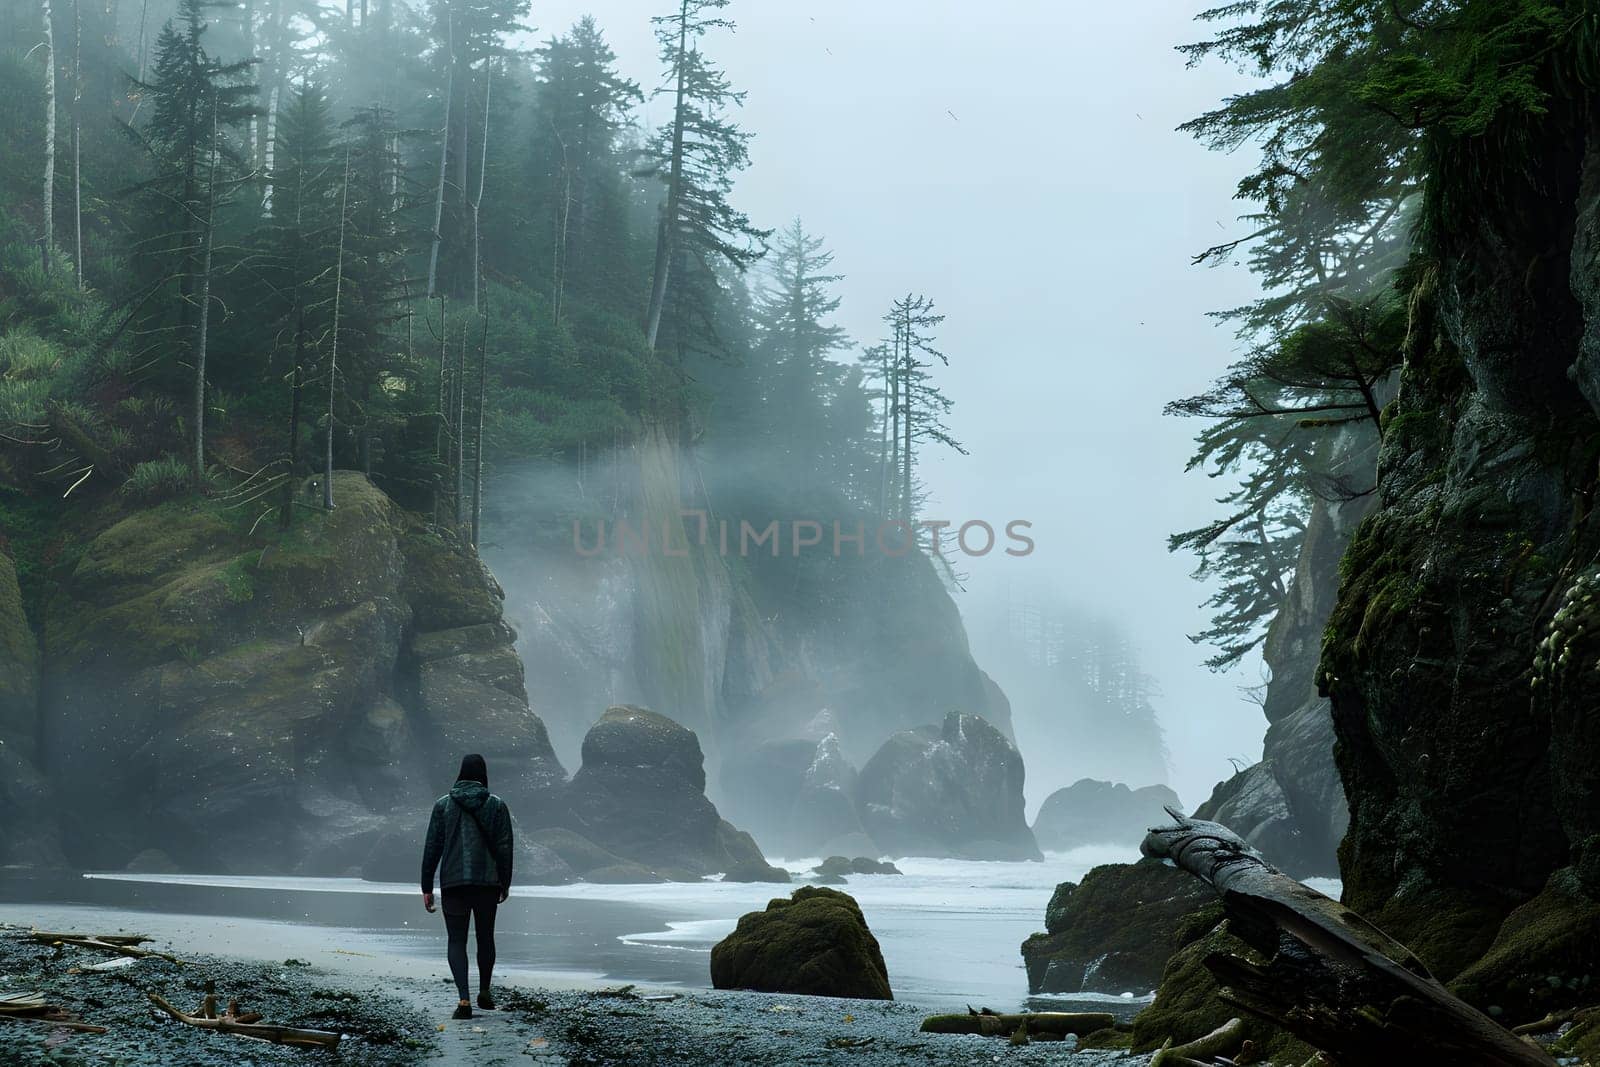 Lone adventurer wanders through lush, mist-covered forest alongside serene rocky beach, embodying solitude and exploration amidst nature's beauty.